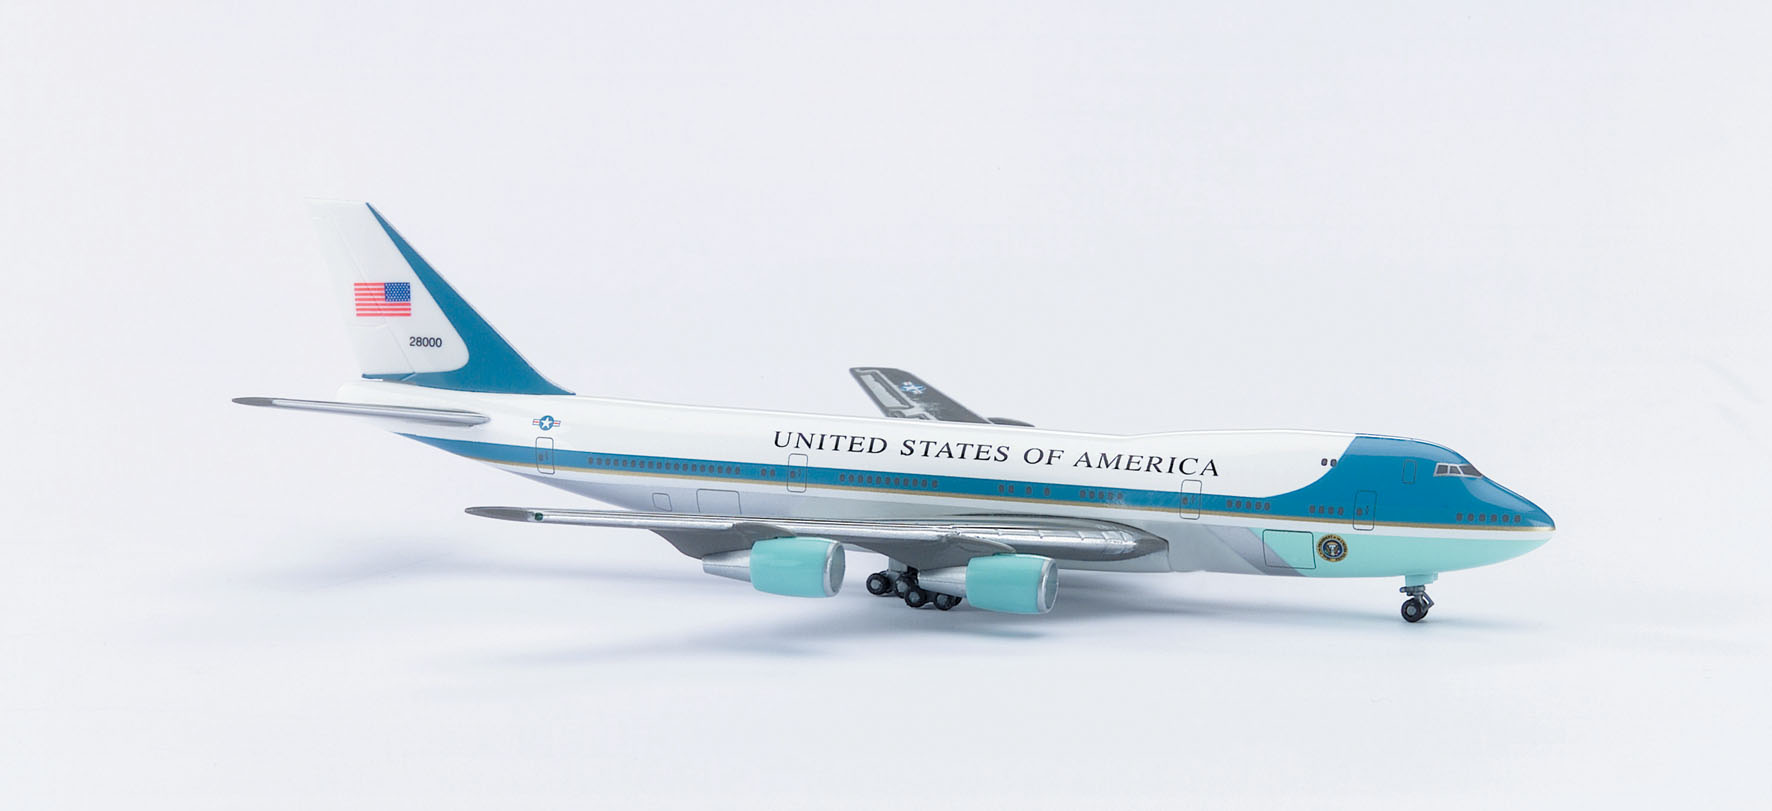 Image not found :Boeing 747-200 Air Force One, US Air Force